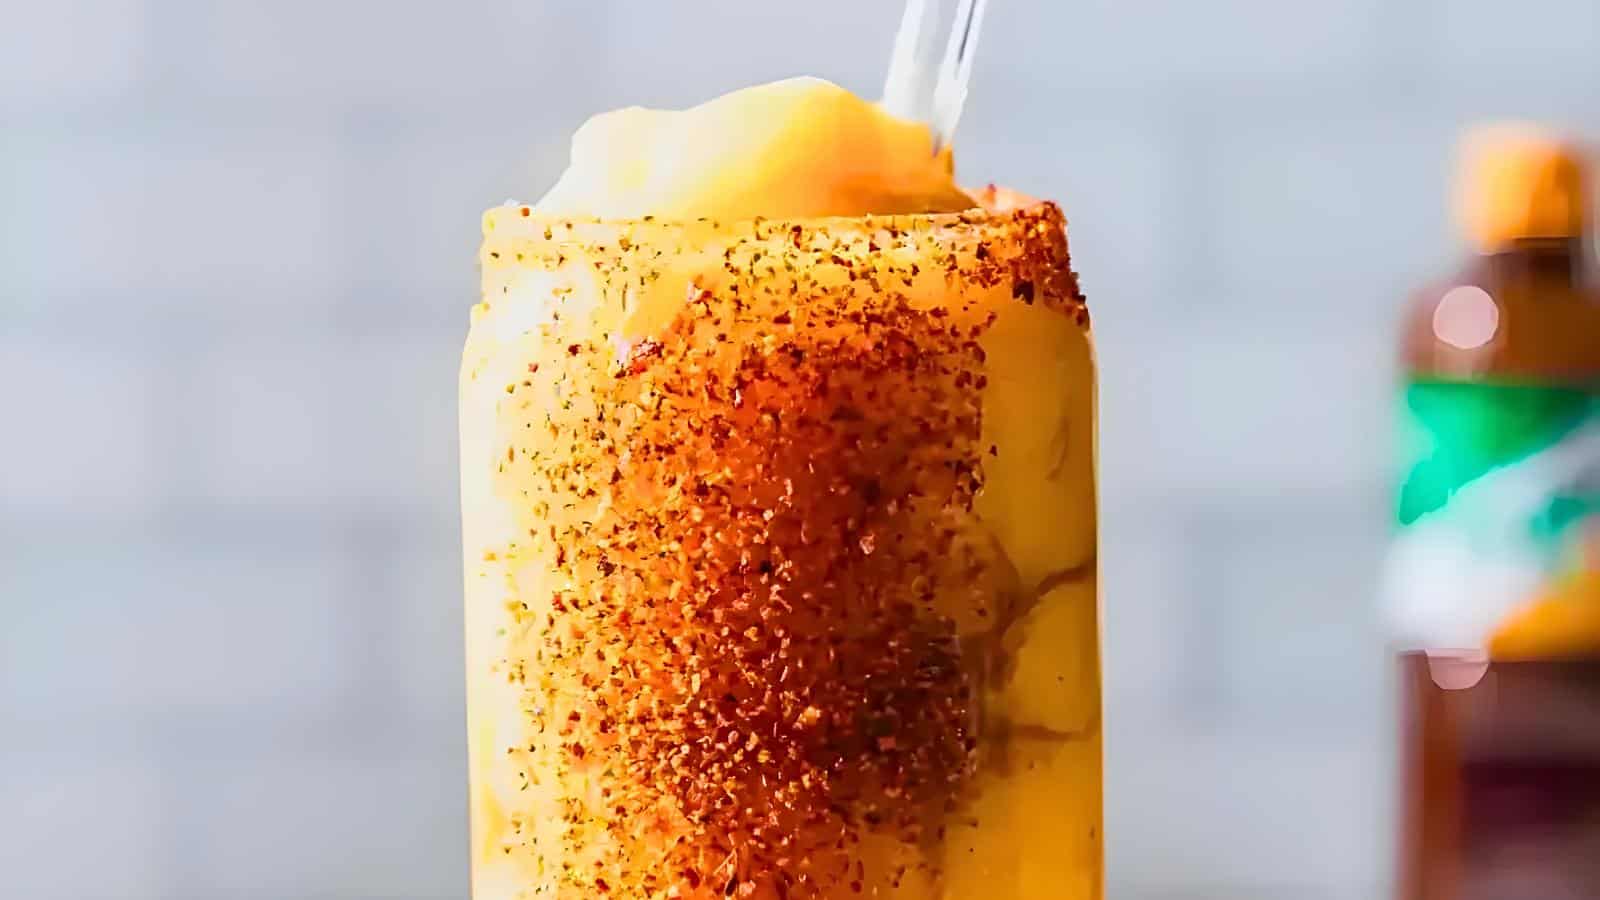 <p>Treat yourself to a Frozen Mangonada Margarita, a summer cocktail dream. This drink combines frozen mango, tangy lime, and a swirl of chamoy for a sweet and spicy kick. It’s a tropical escape in a glass.<br><strong>Get the Recipe: </strong><a href="https://www.sweetteaandthyme.com/frozen-mangonada-margarita-recipe/?utm_source=msn&utm_medium=page&utm_campaign=msn" rel="noopener">Frozen Mangonada Margarita</a></p>